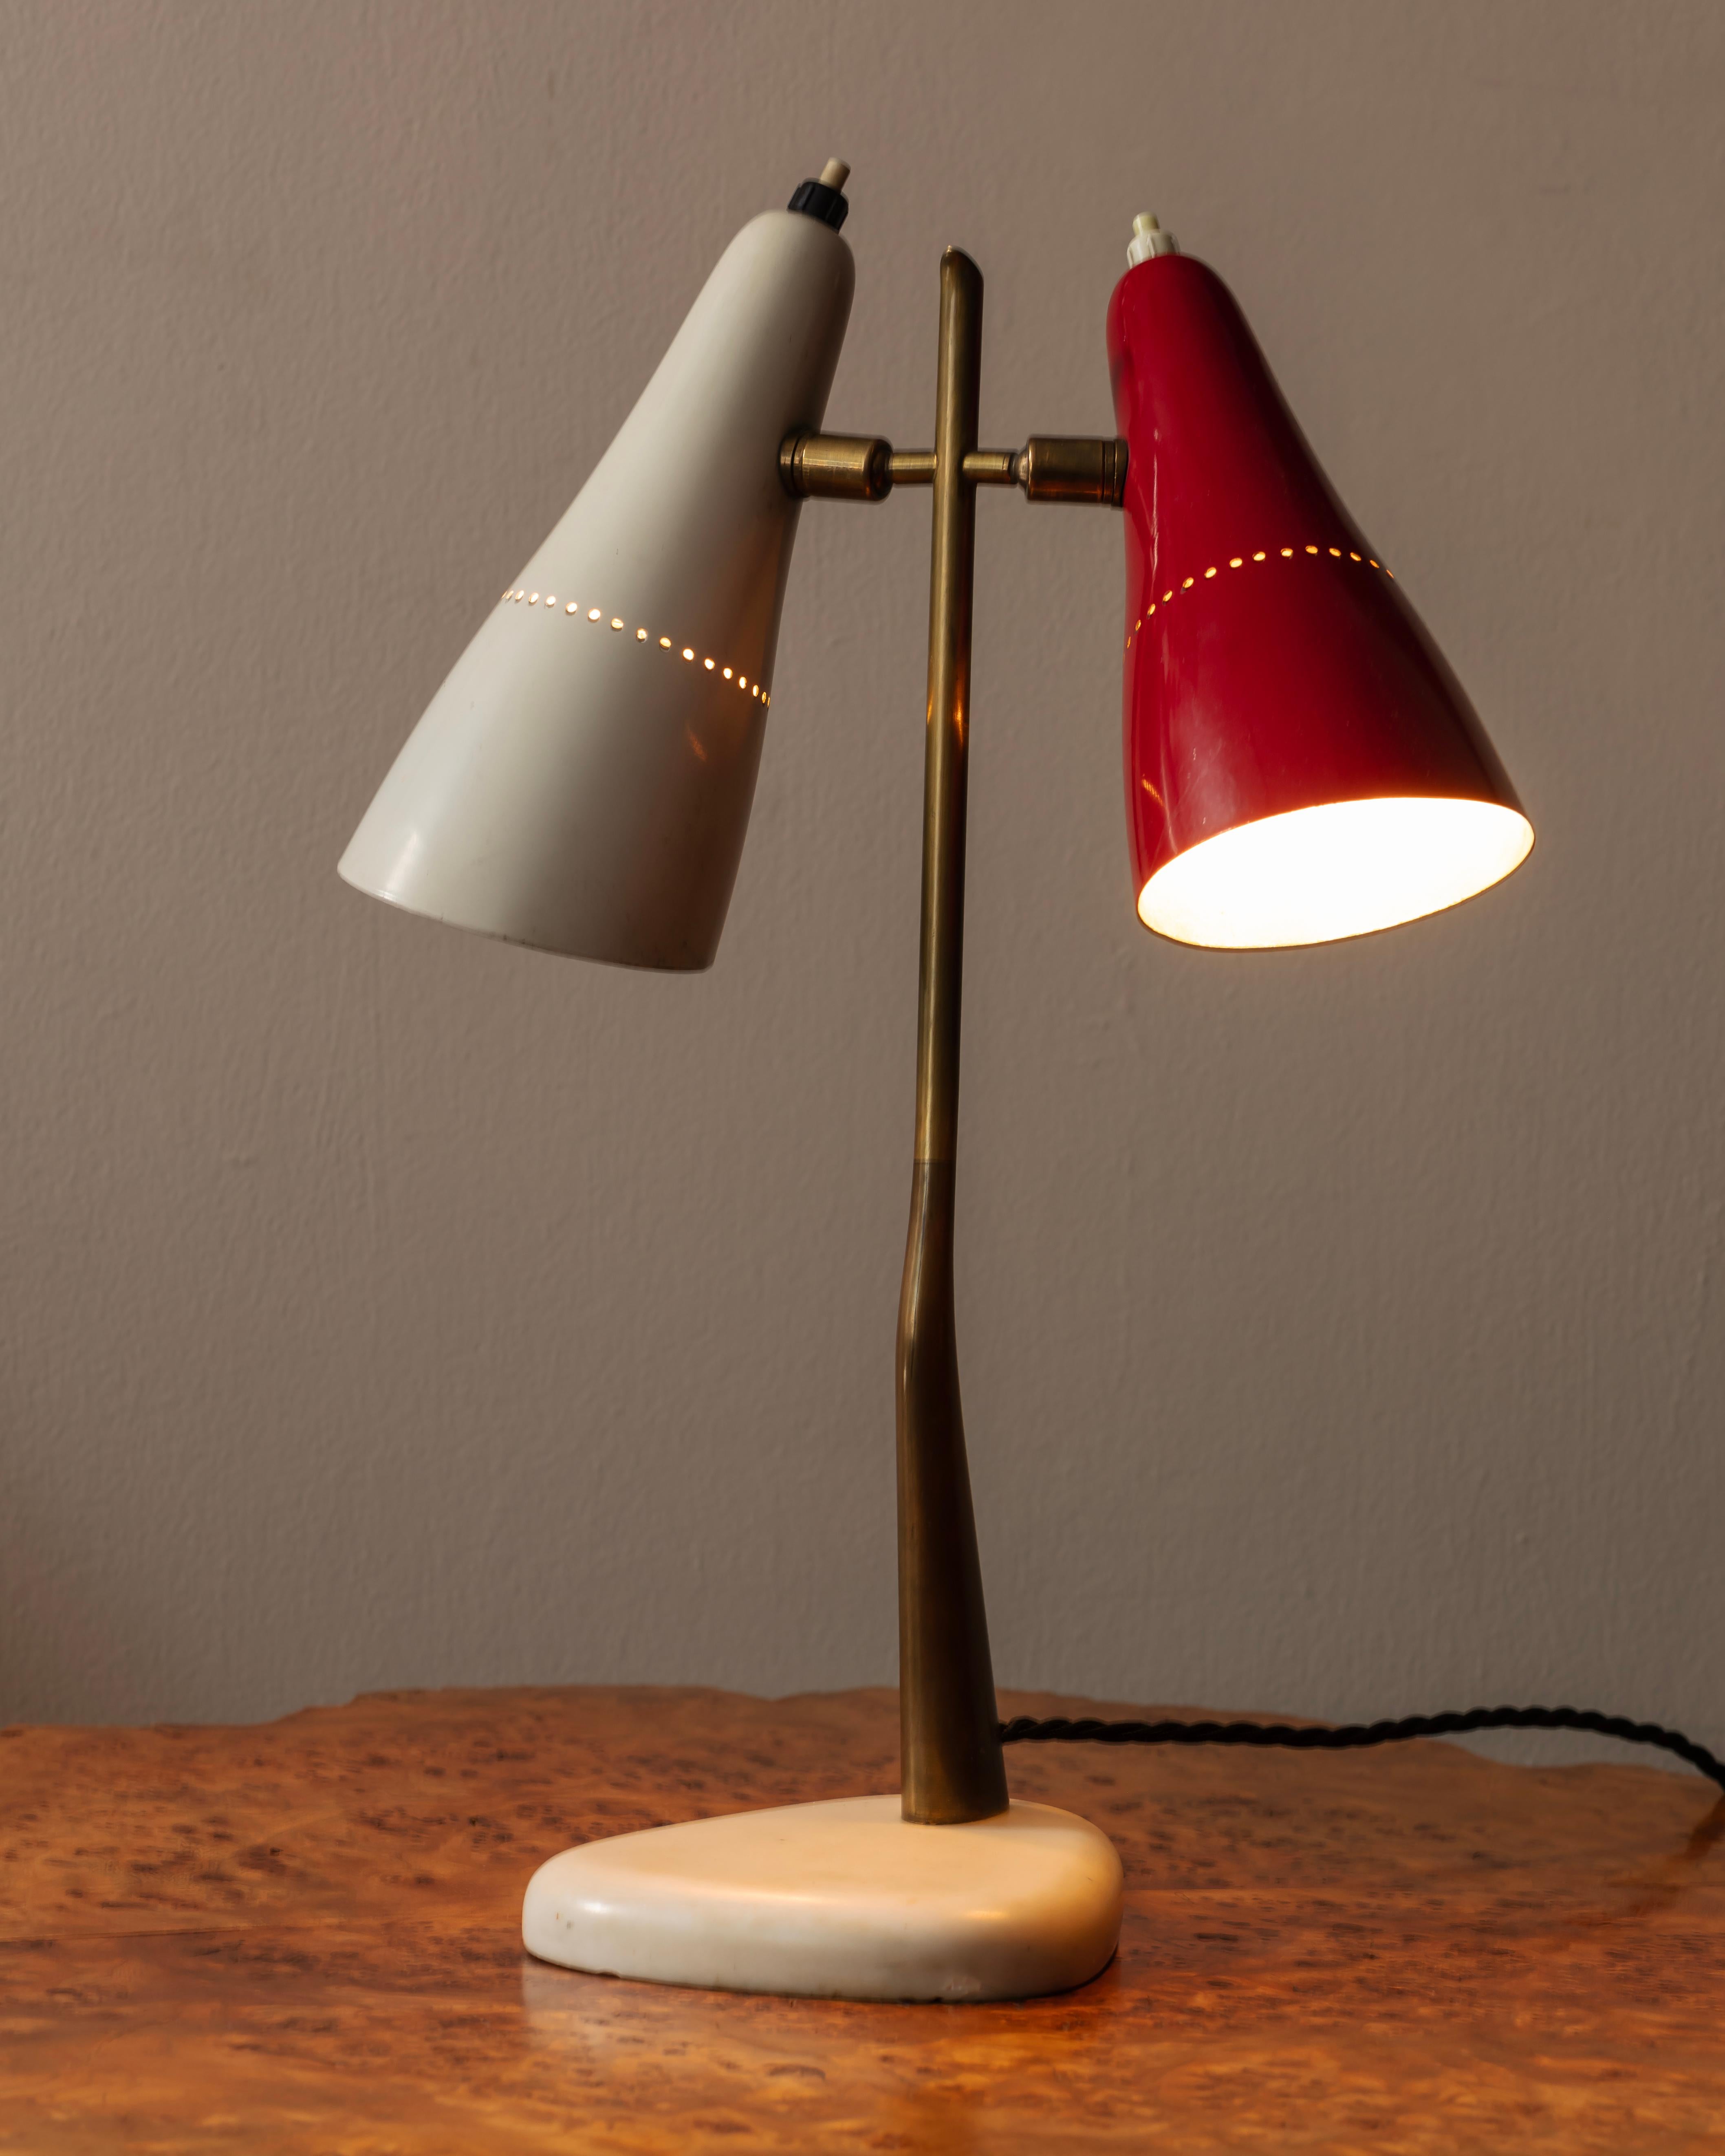 Double headed desk lamp, red and cream enamel lampshades on an elegant brass upright and marble base. Excellent original condition. A rare design confidently attributed to Oscar Torlasco proably for Lumi, Milan. Rewired to UK standards with